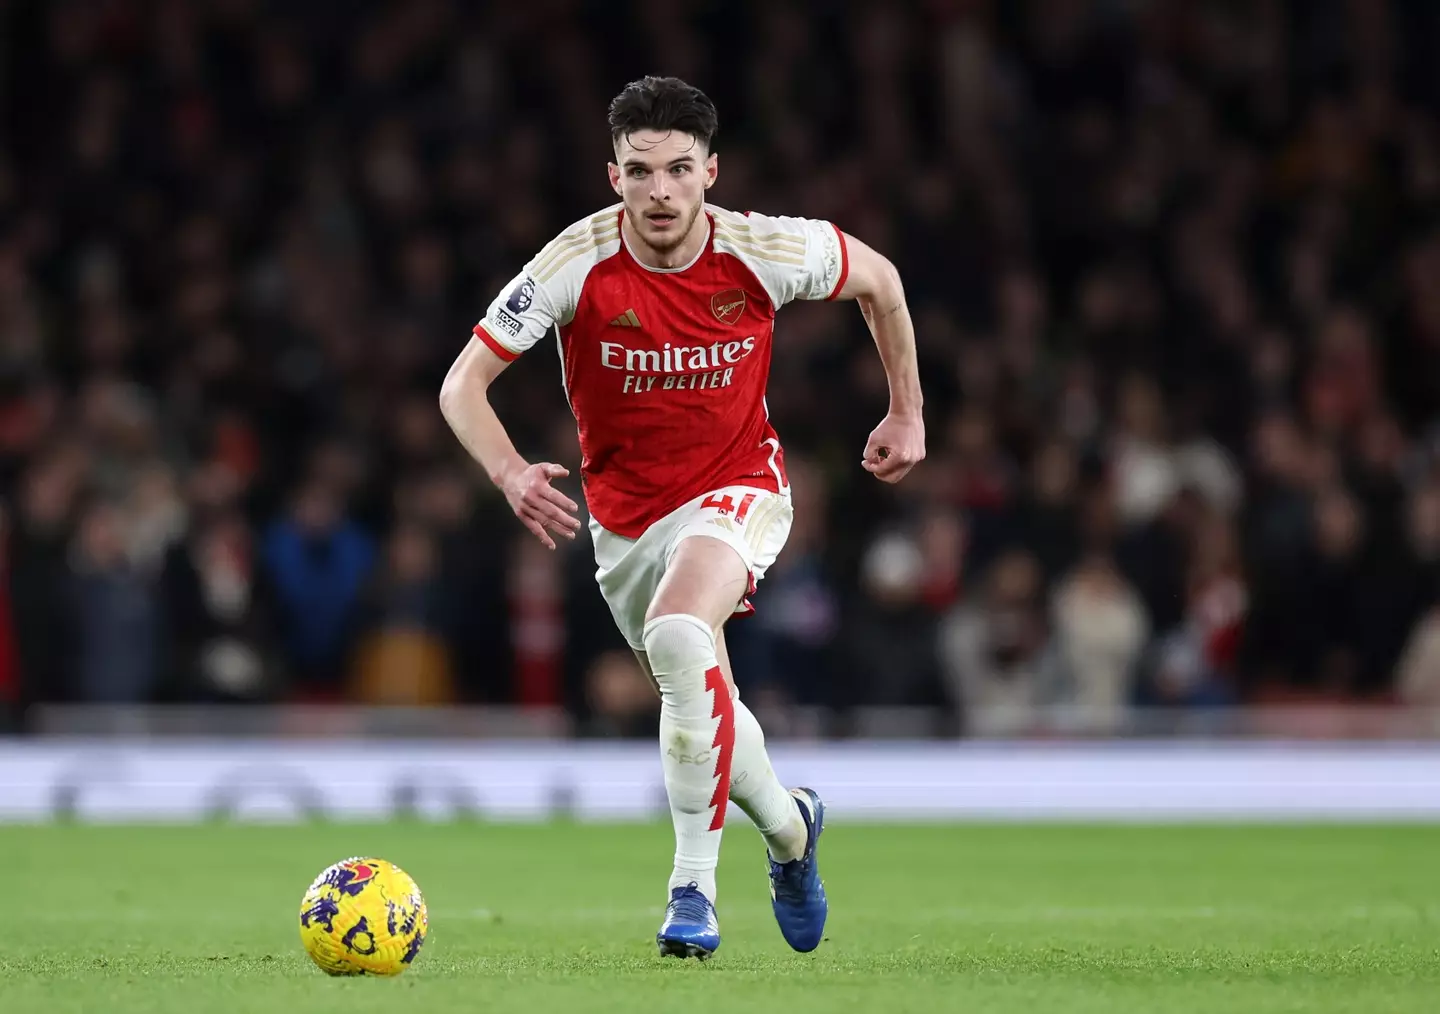 Declan Rice in action for Arsenal. Image: Getty 